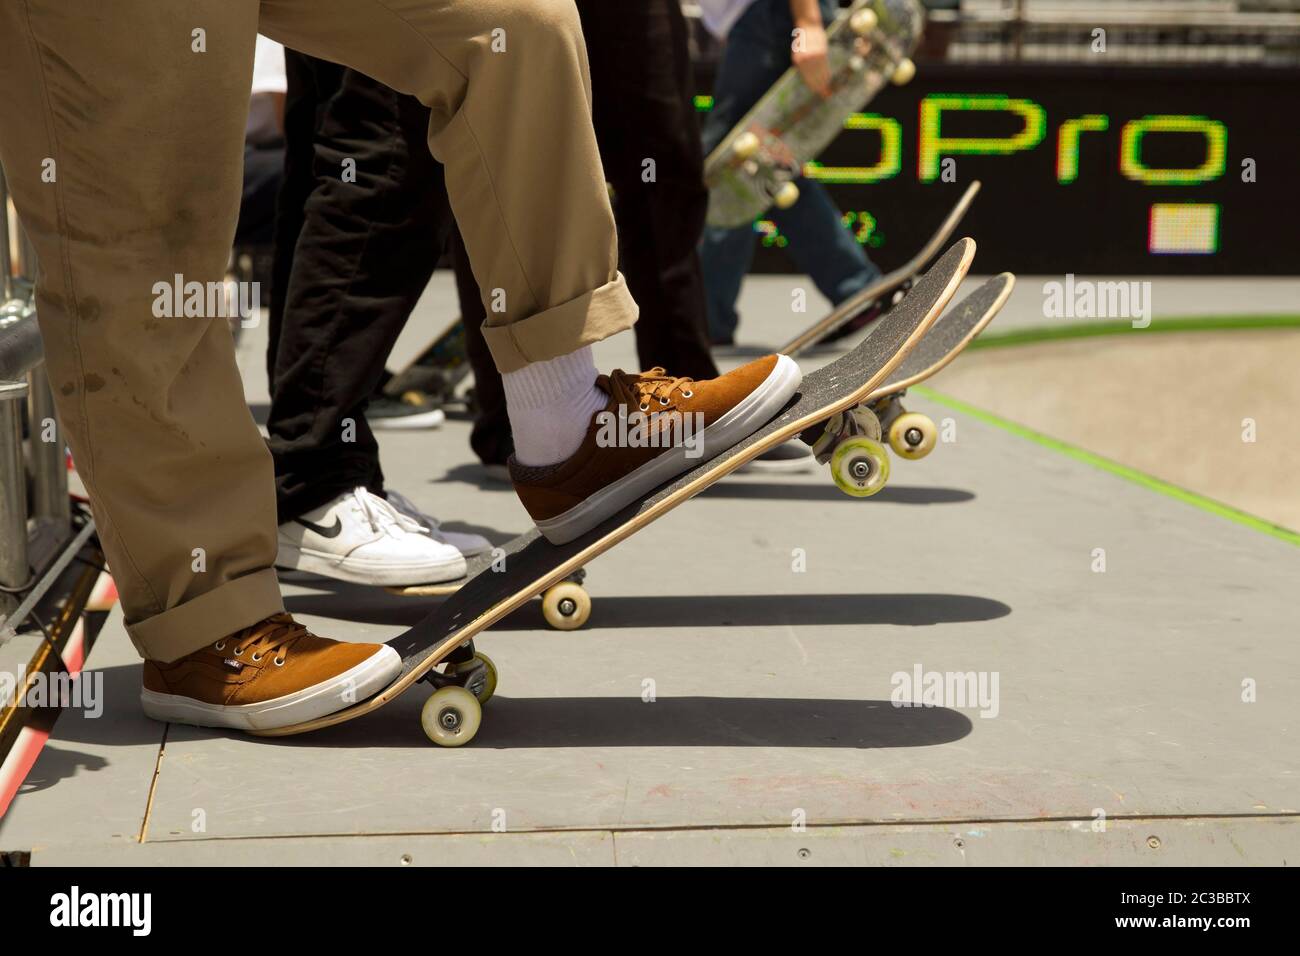 X-Games Austin, Texas USA, June 7 2014:  Skateboarders wait at starting line to take their practice runs before competing on the skateboard park course at the X Games at the Circuit of the Americas motor sports complex. ©Marjorie Kamys Cotera/Daemmrich Photography Stock Photo